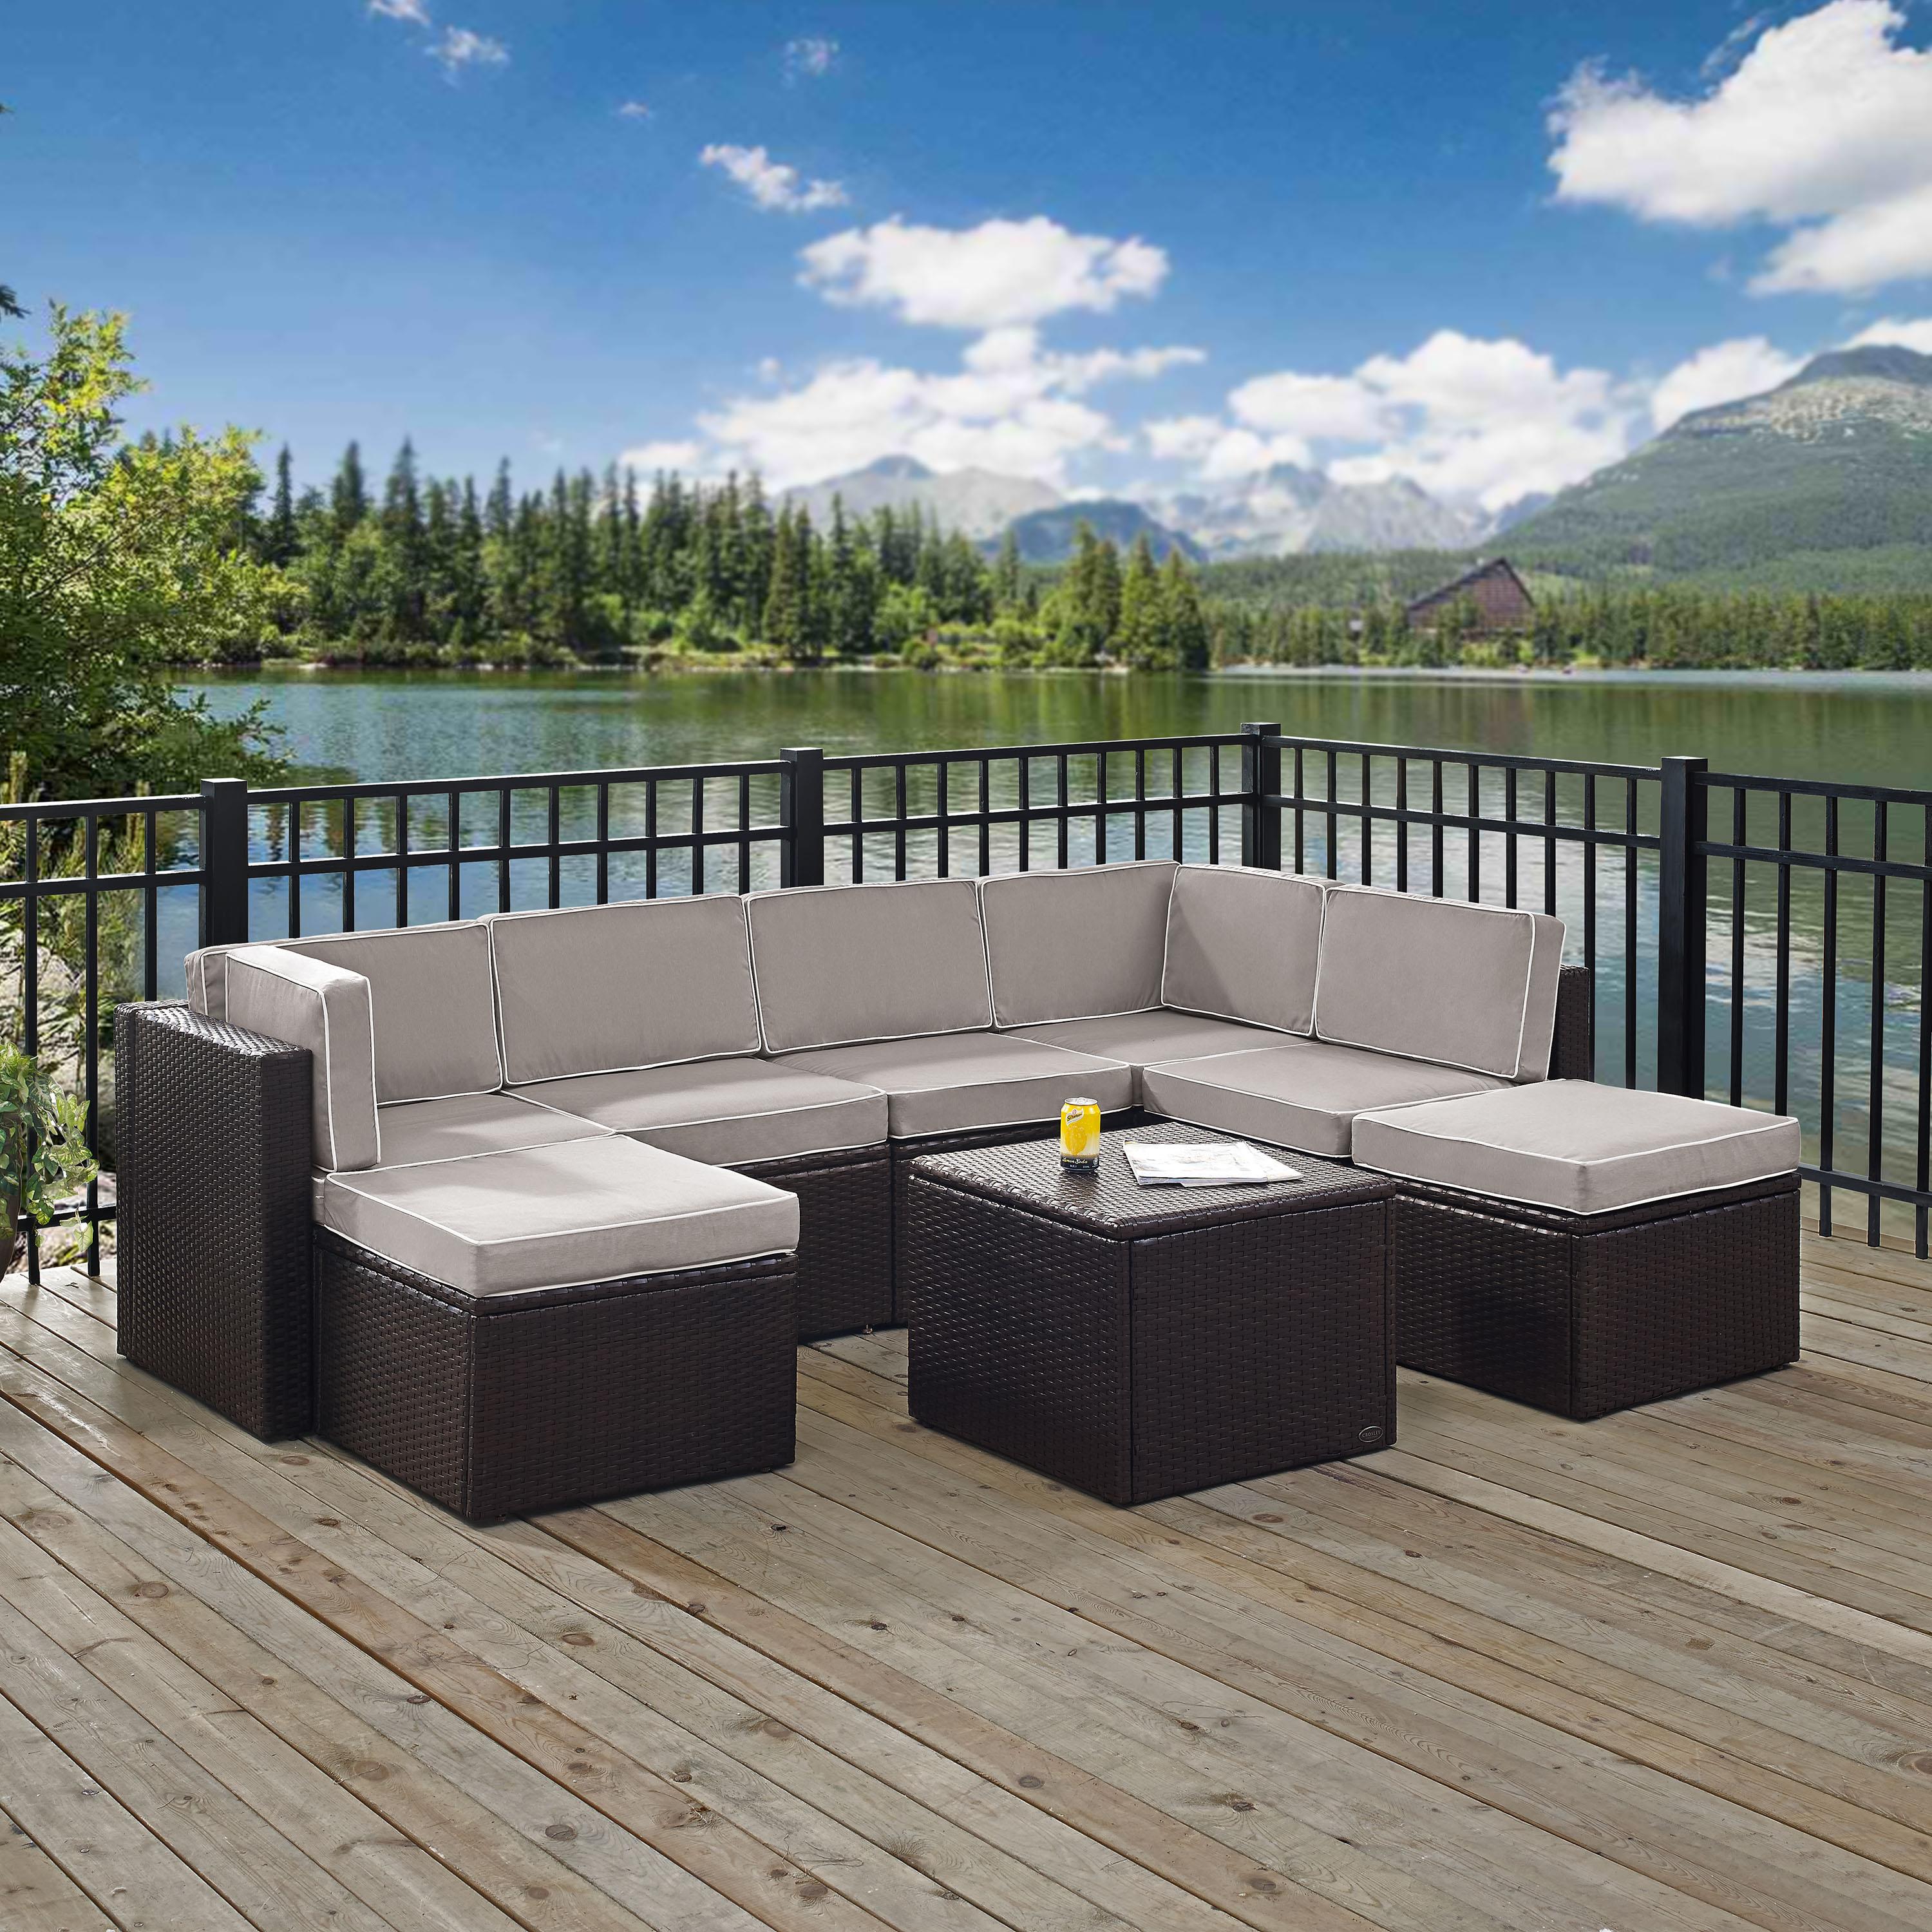 Crosley Furniture KO70008BR-GY Palm Harbor 8-Piece Resin Wicker Outdoor Sectional Seating Set (Brown/Grey) - image 5 of 7